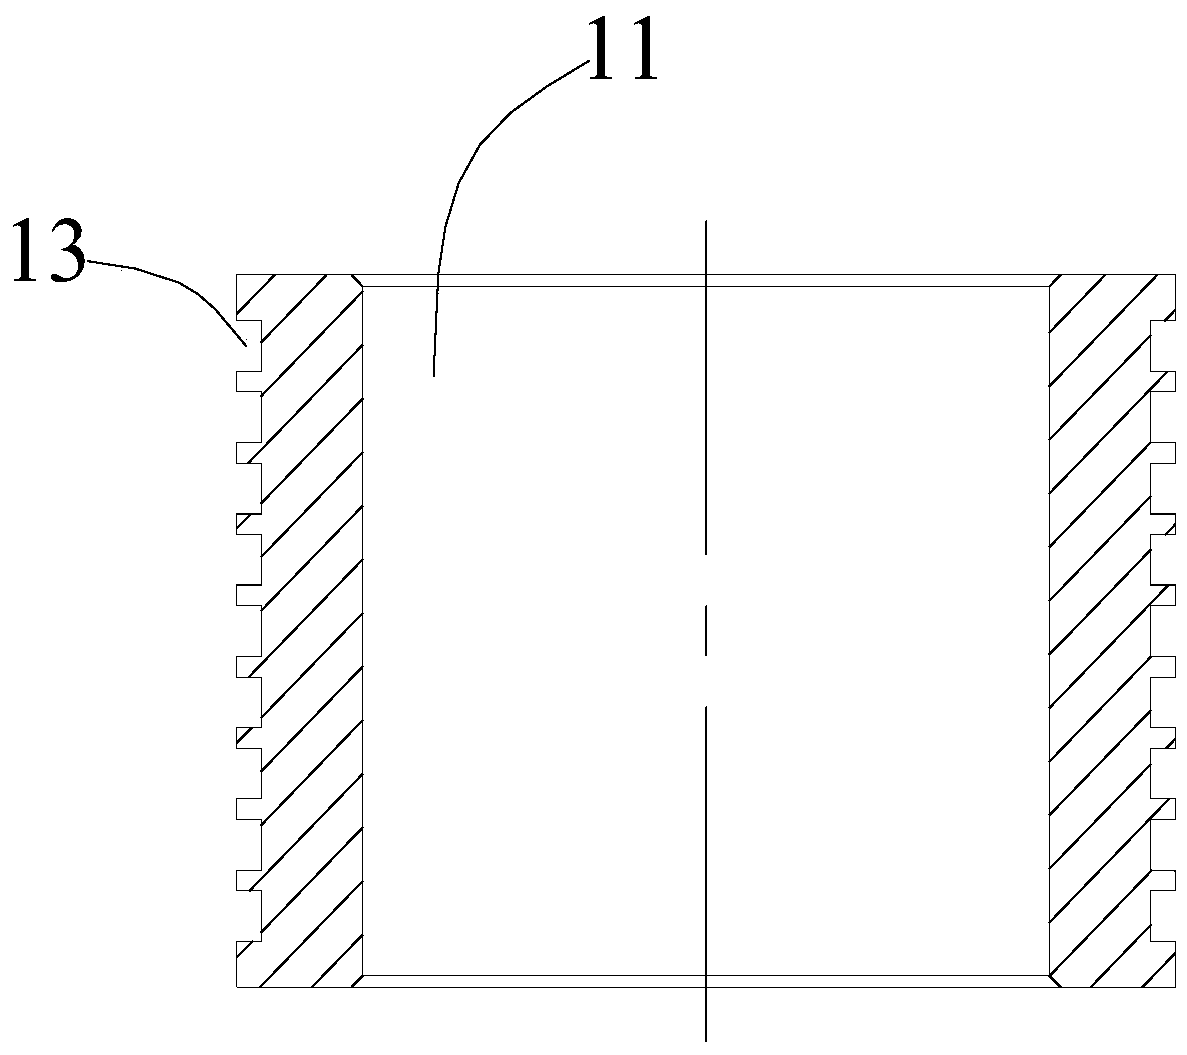 Cooperating structure of a compressor and its rollers and sliding vanes